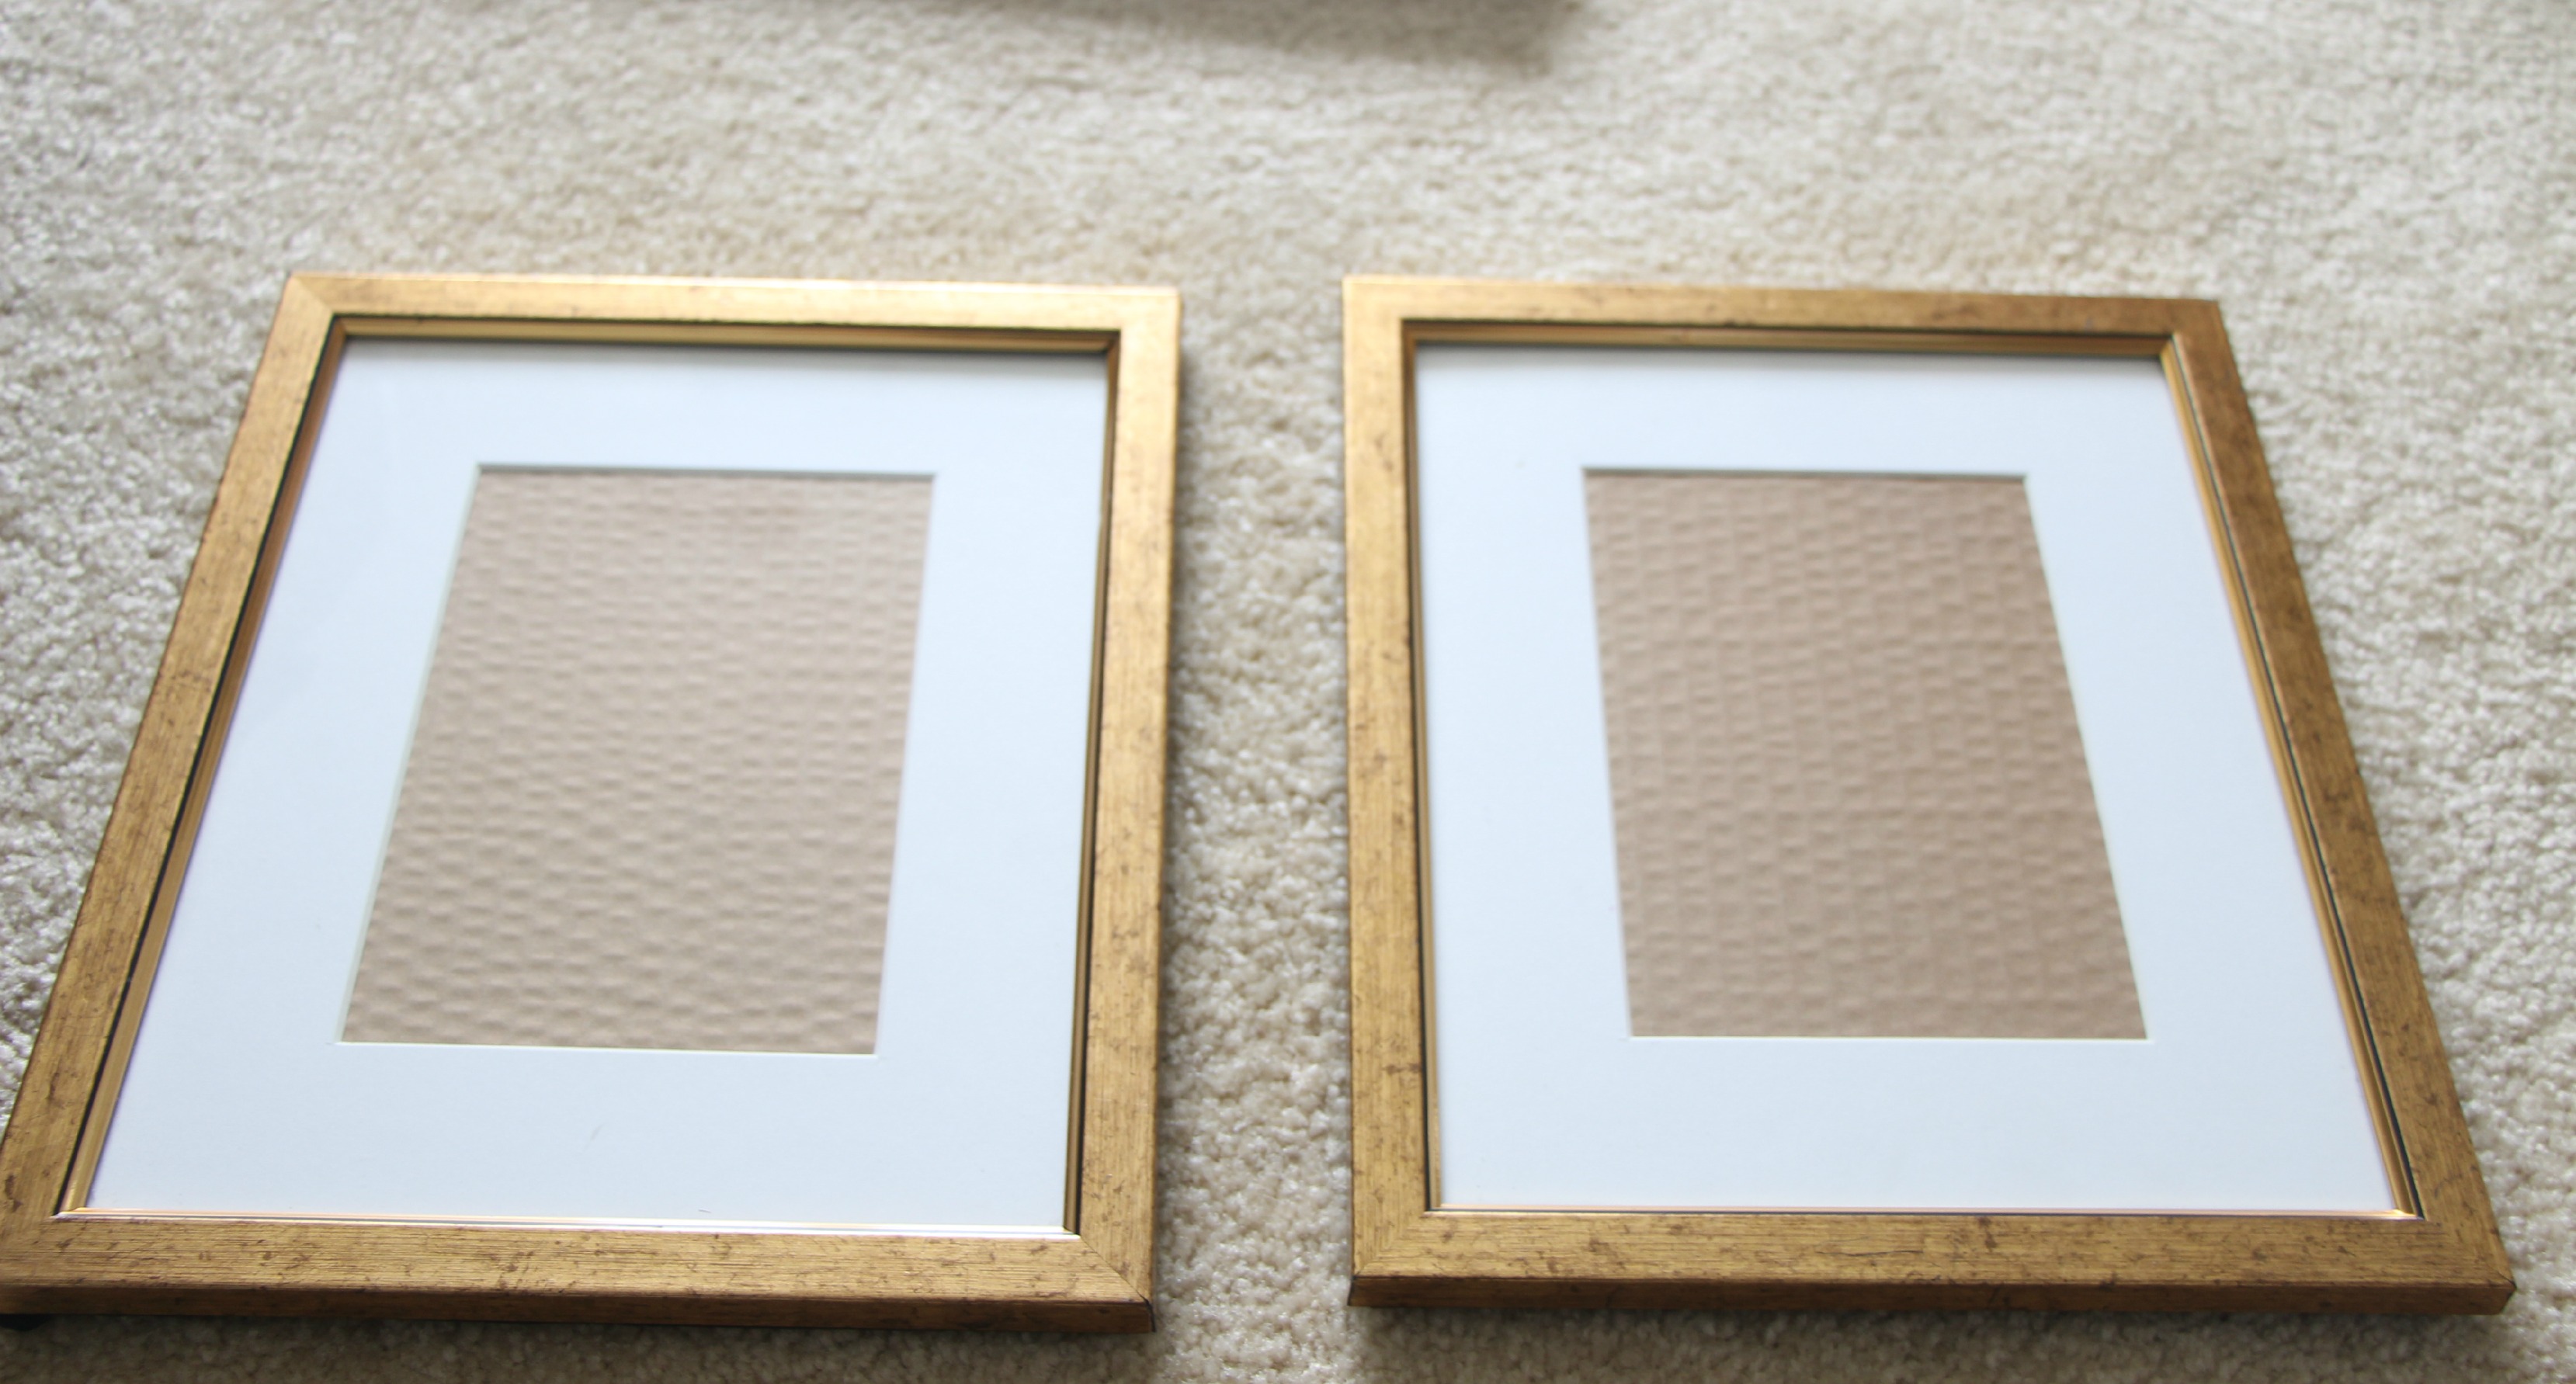 pair of gold goodwill frames - thrifted picture frames - how to thrift frames - This is our Bliss